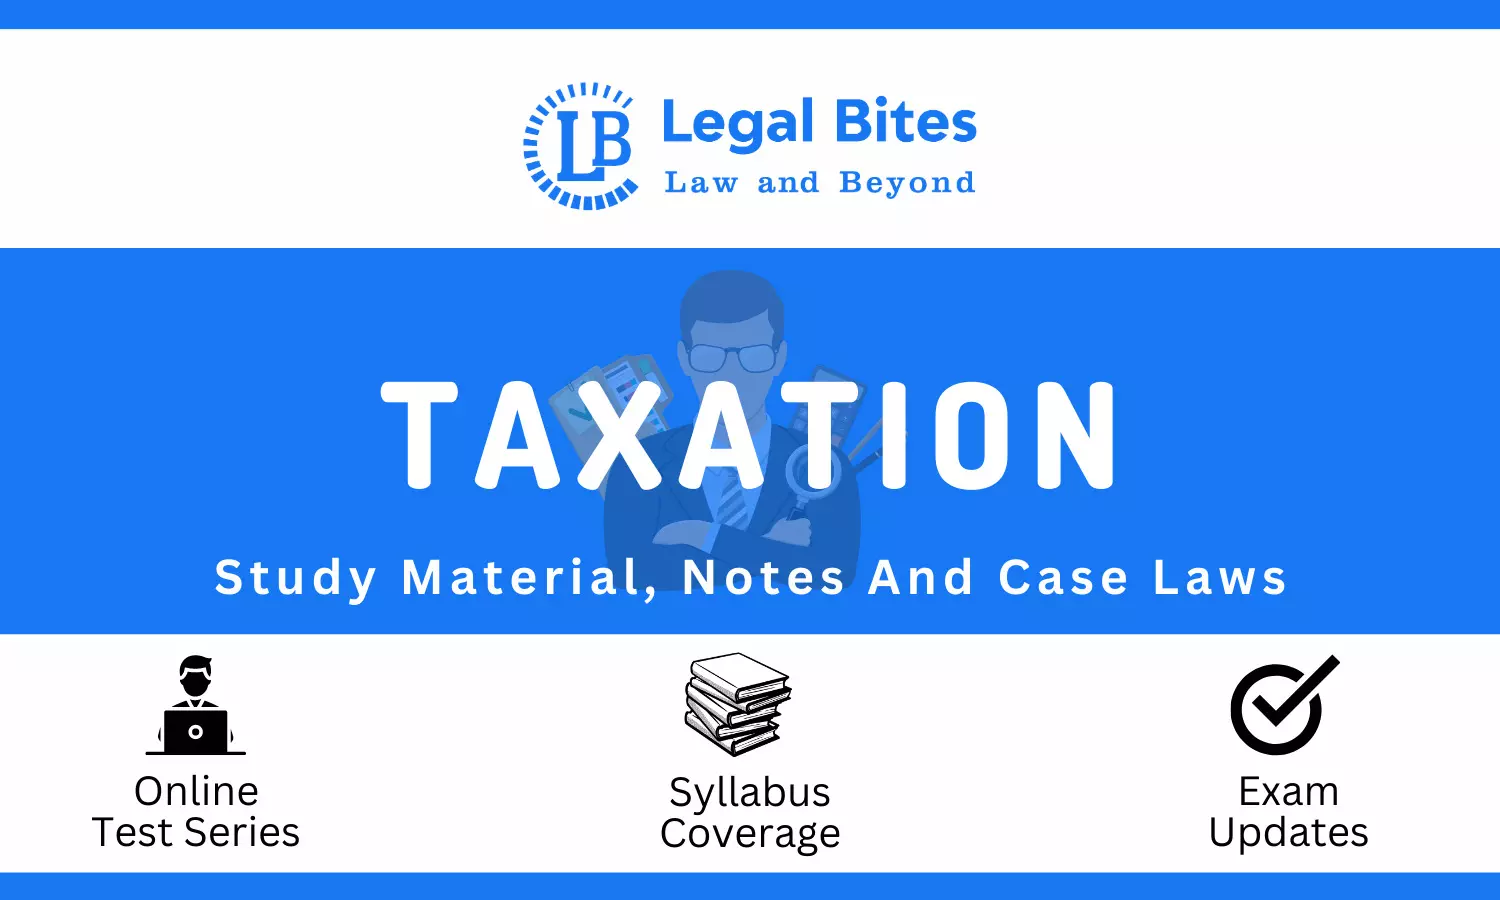 Taxation Law - Notes, Case Laws And Study Material